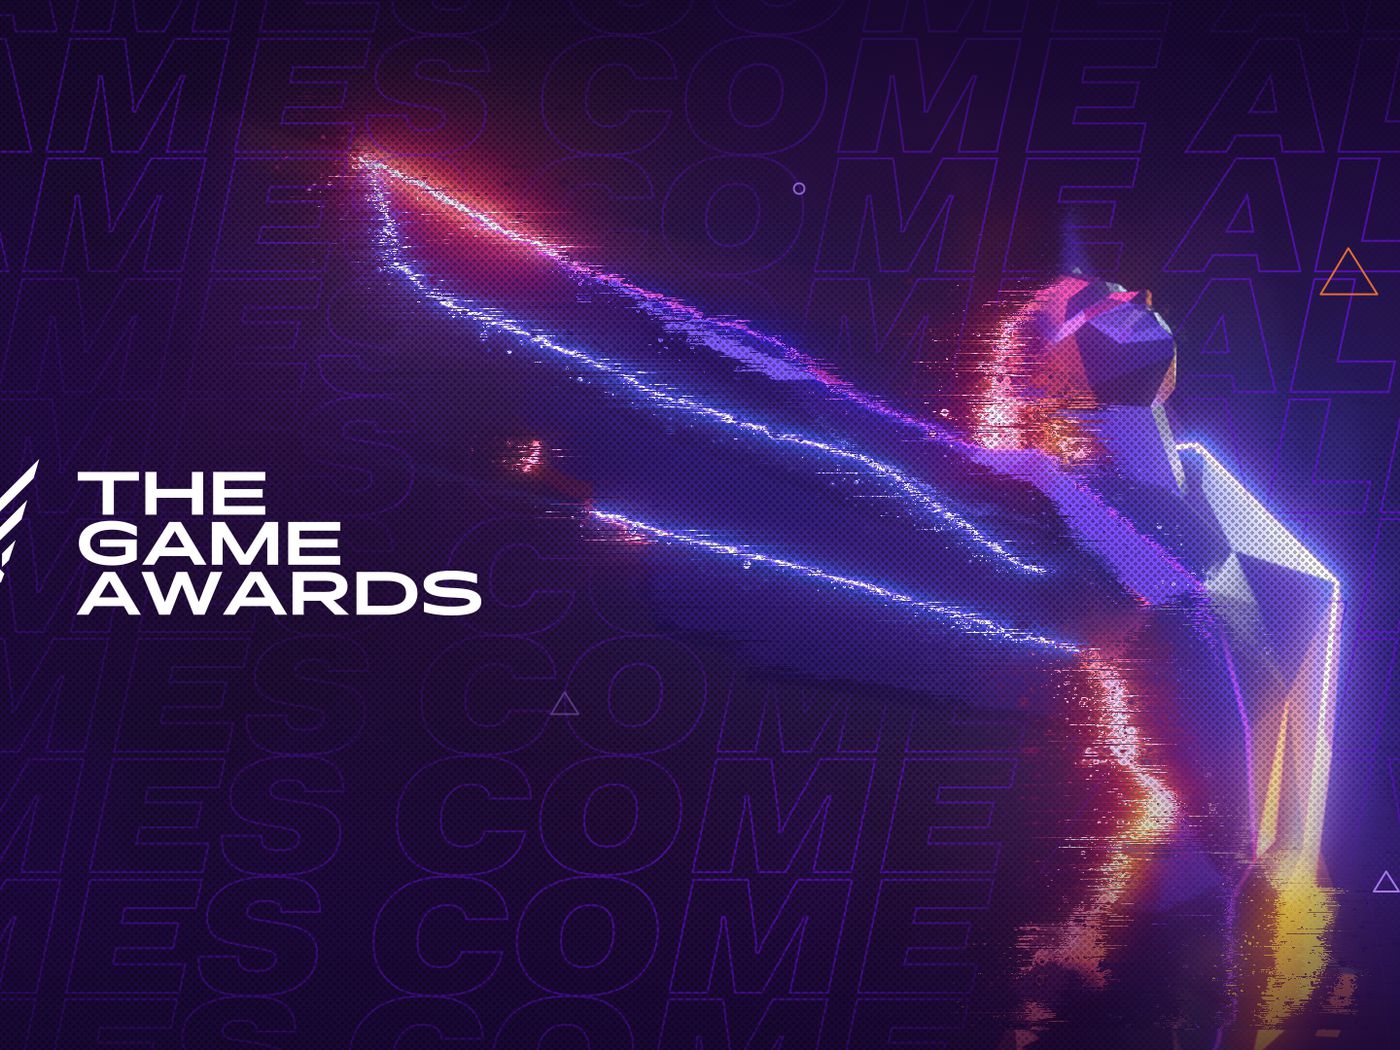 The Game Awards rundown of most outstanding upcoming game trailers at the event